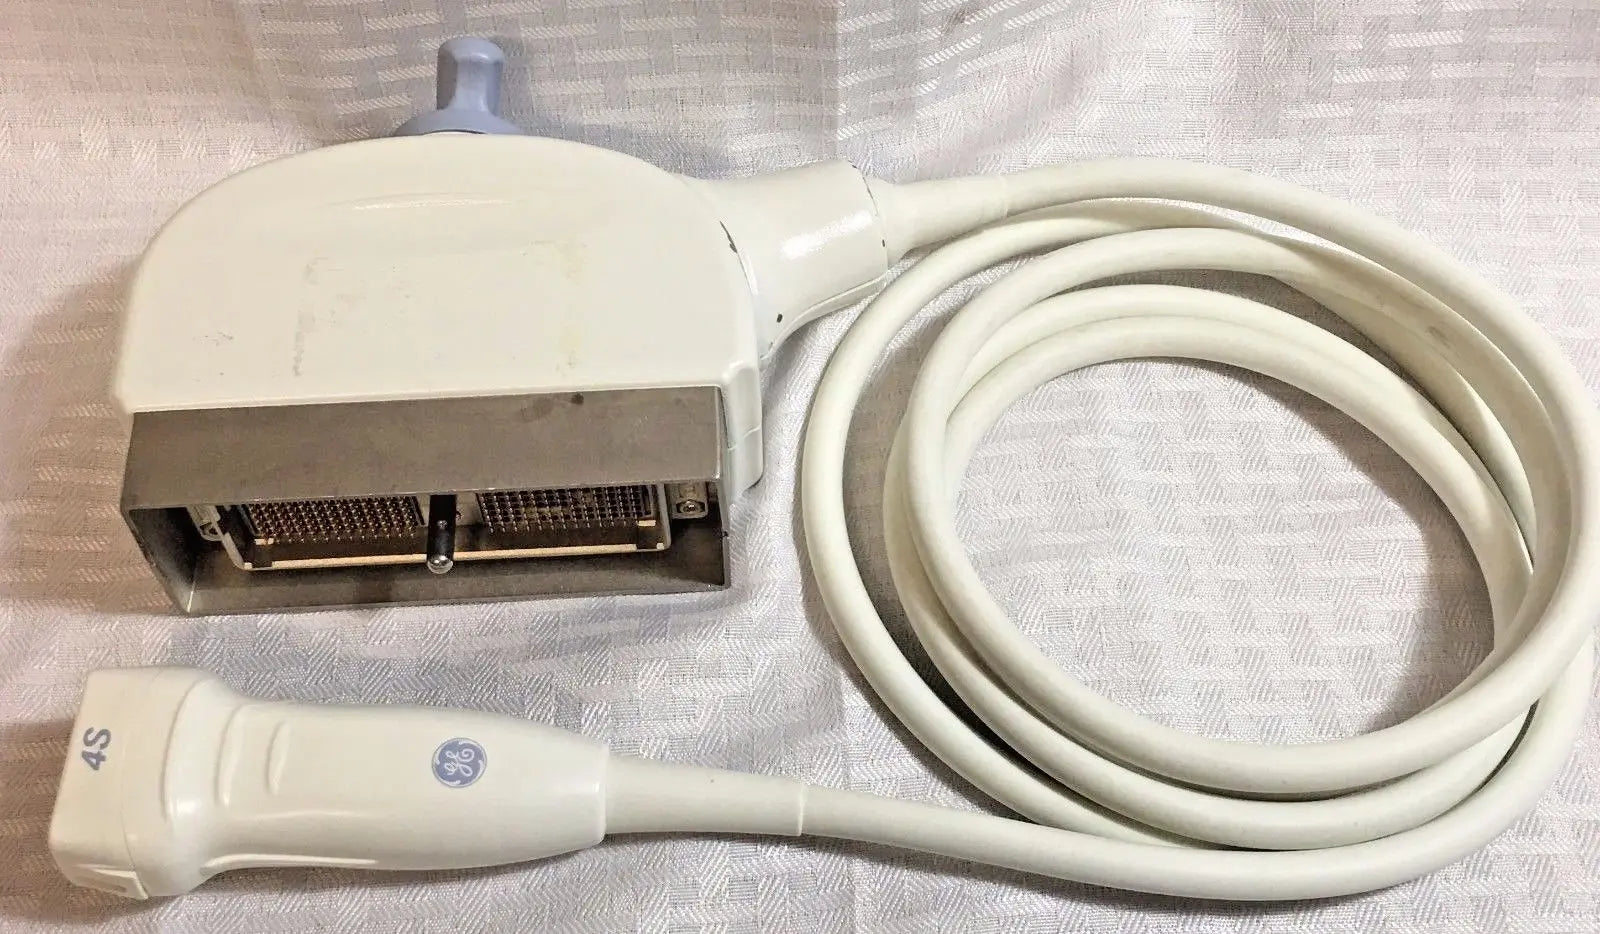 GE's 4S Probe for Logiq and Vivid series Ultrasound - "Excellent Condition" DIAGNOSTIC ULTRASOUND MACHINES FOR SALE